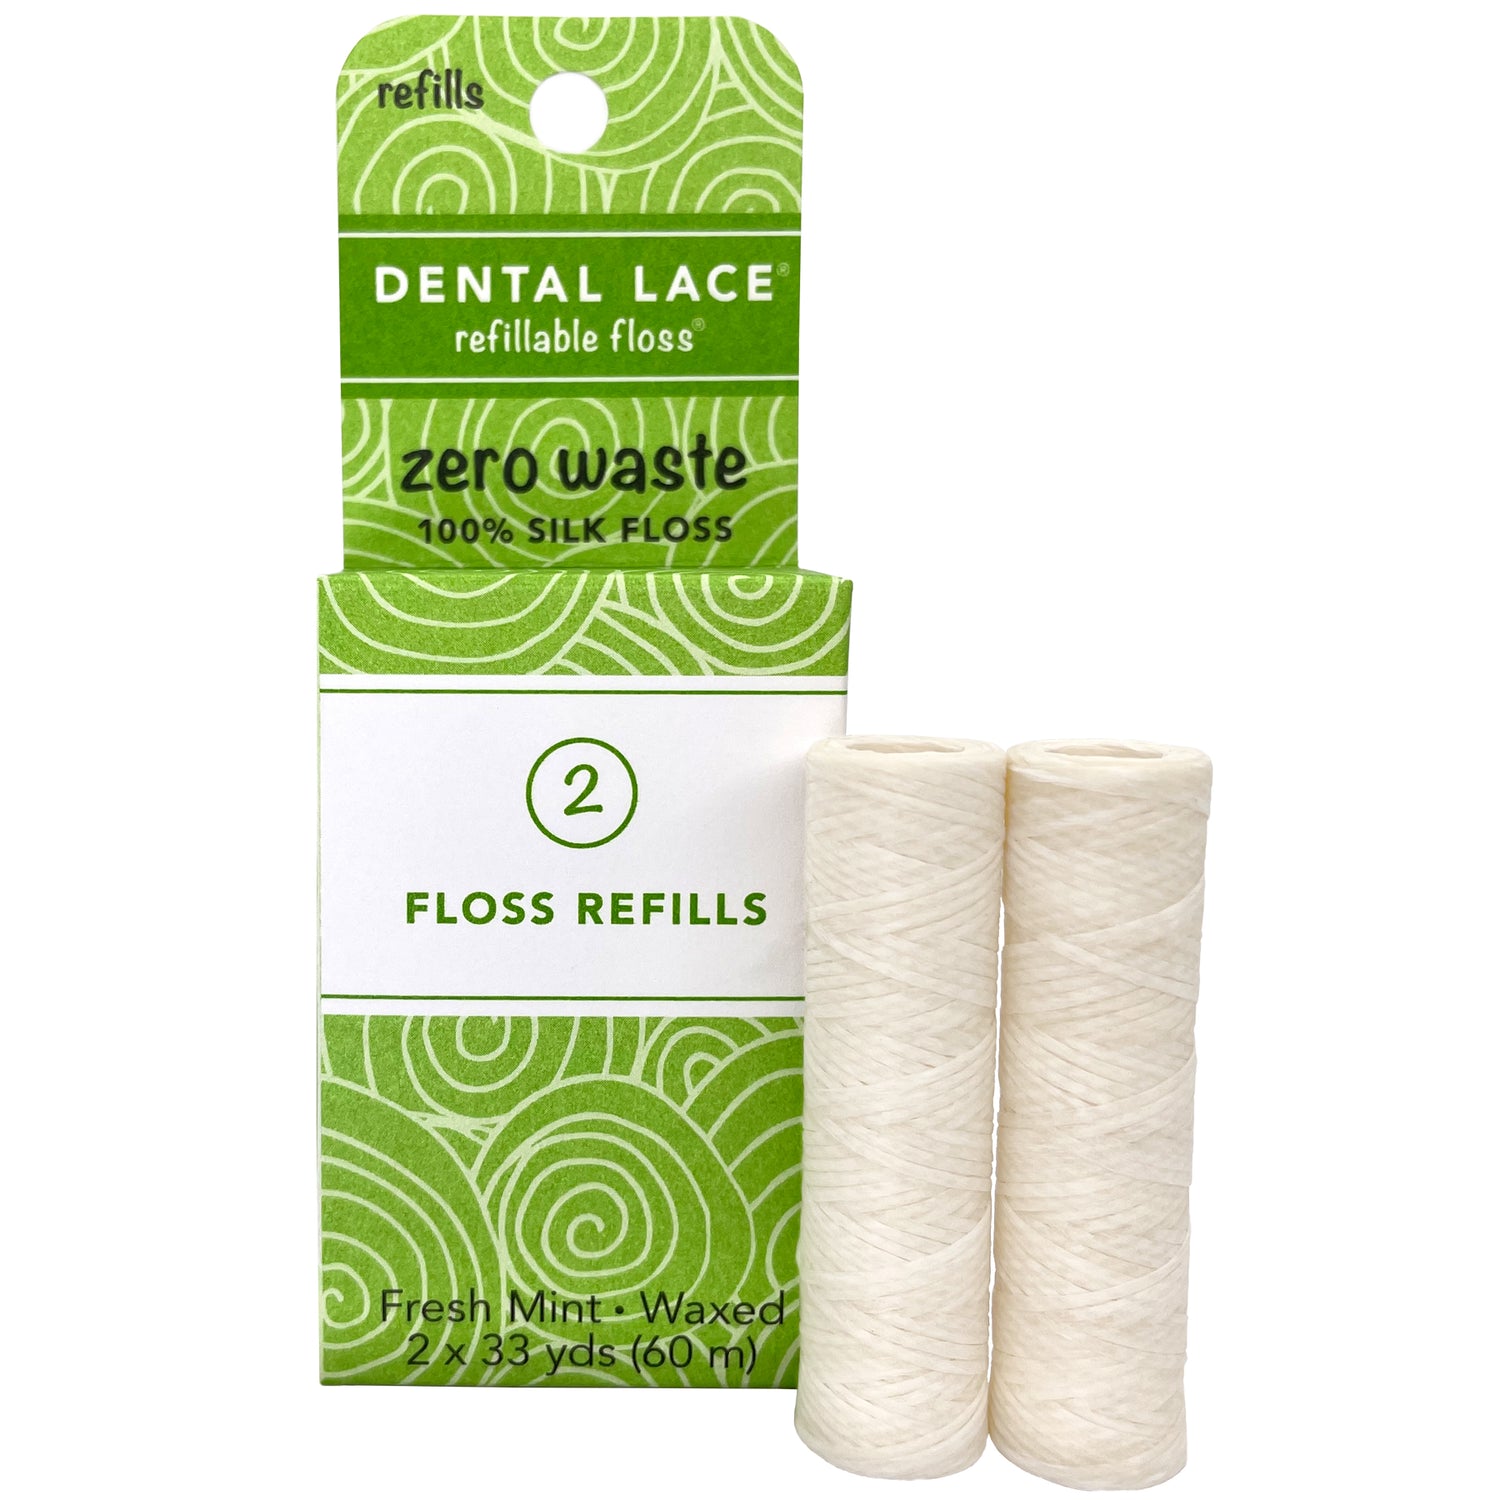 Dental Lace Refillable Zero Waste Plant Based Vegan Floss Container with  Refill